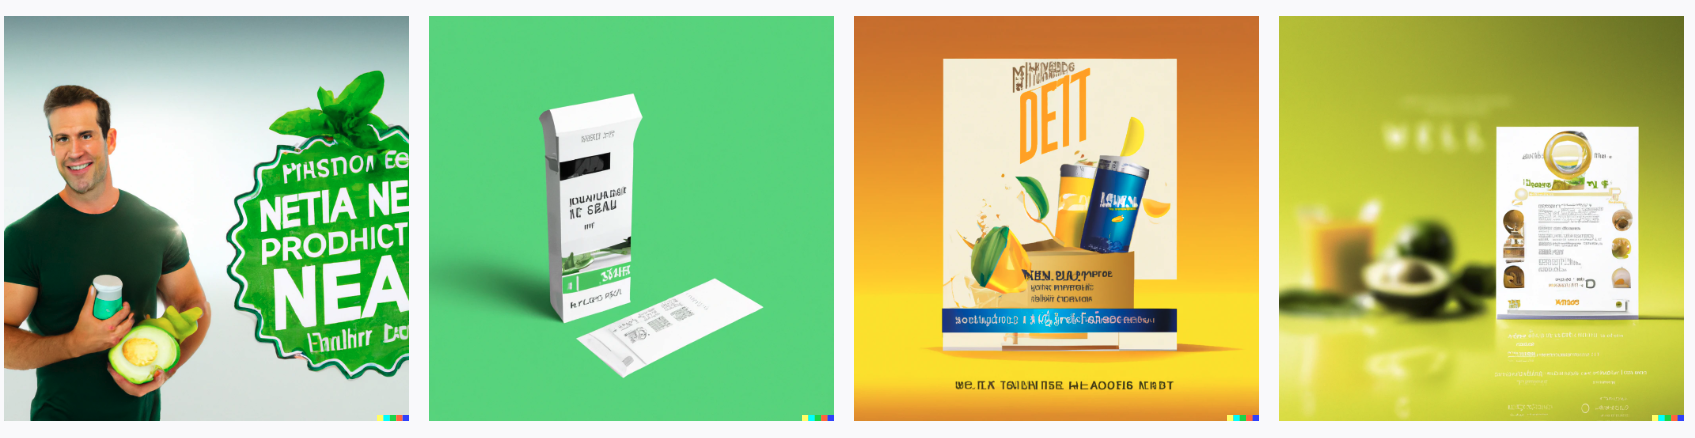 marketing creative for a wellness brand offering diet products